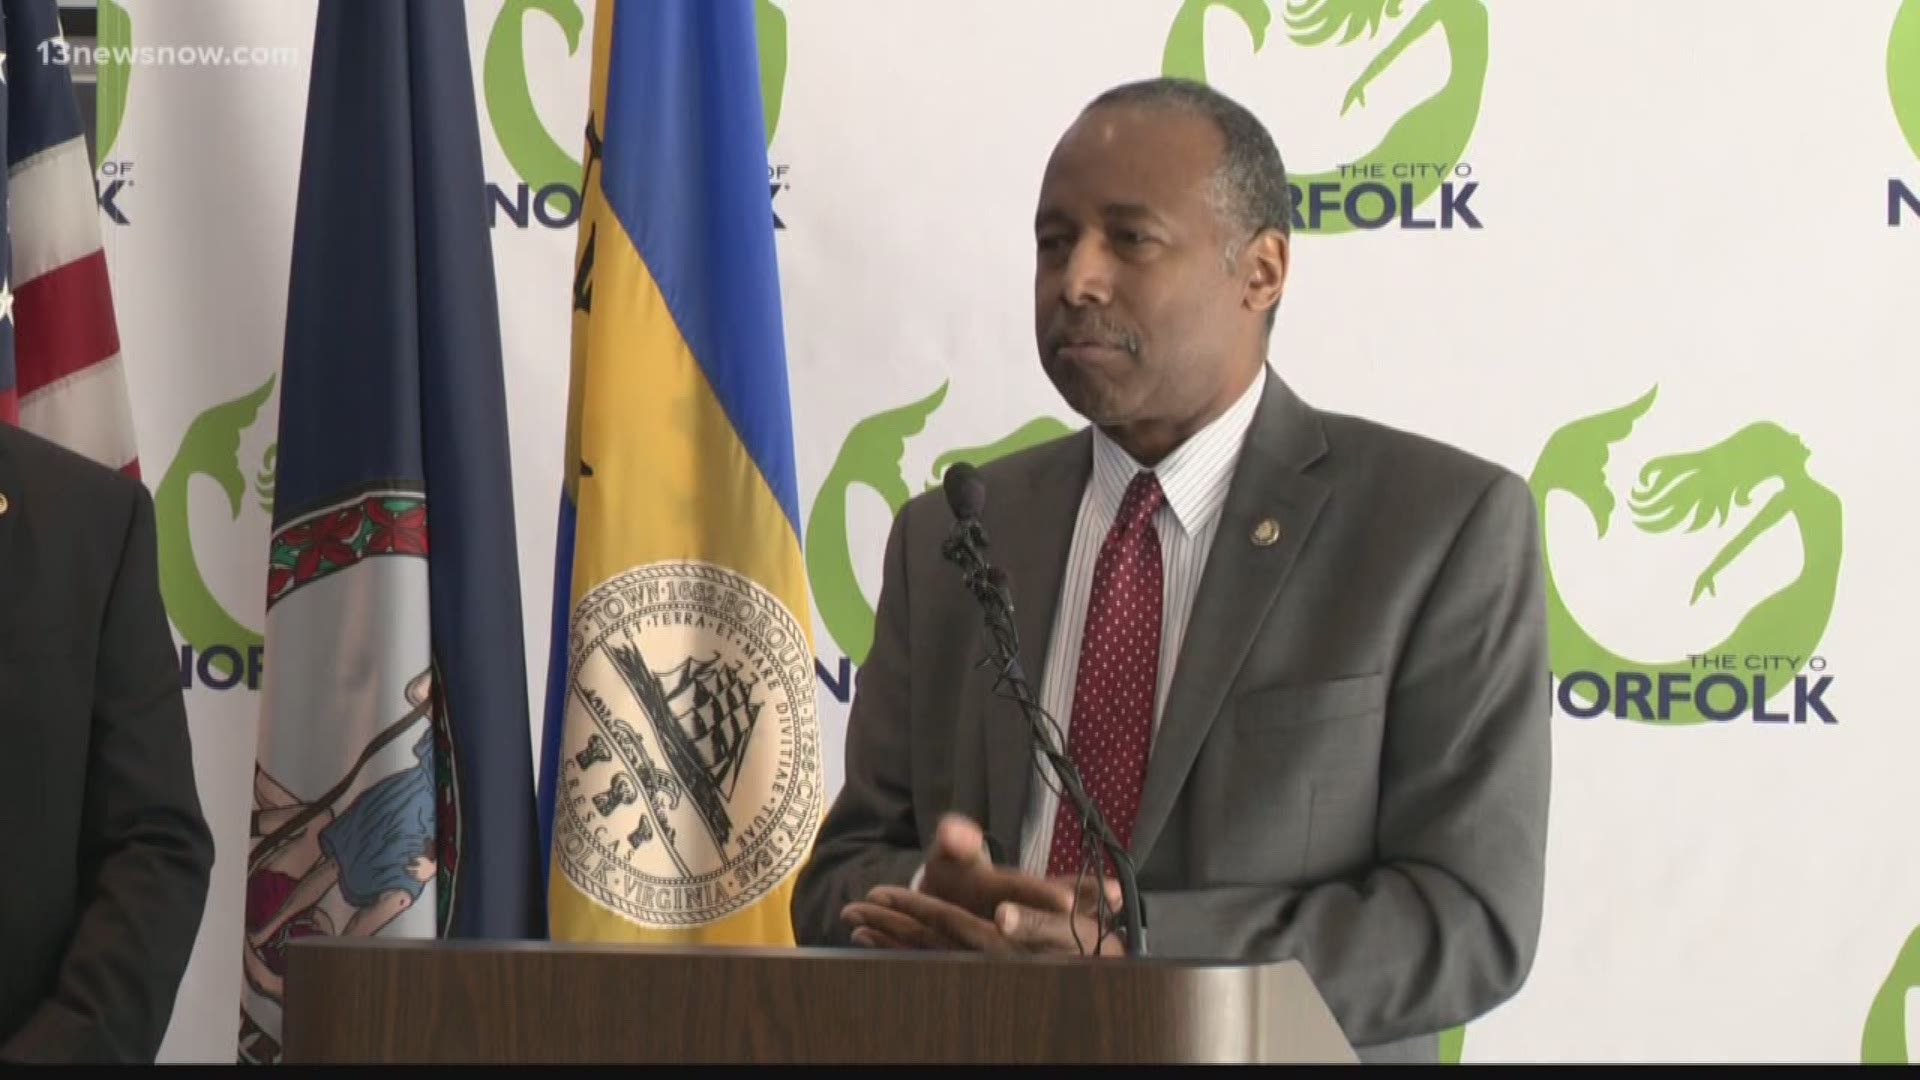 The nation's top housing official says Norfolk is likely to win a federal "Opportunity Zone" designation.